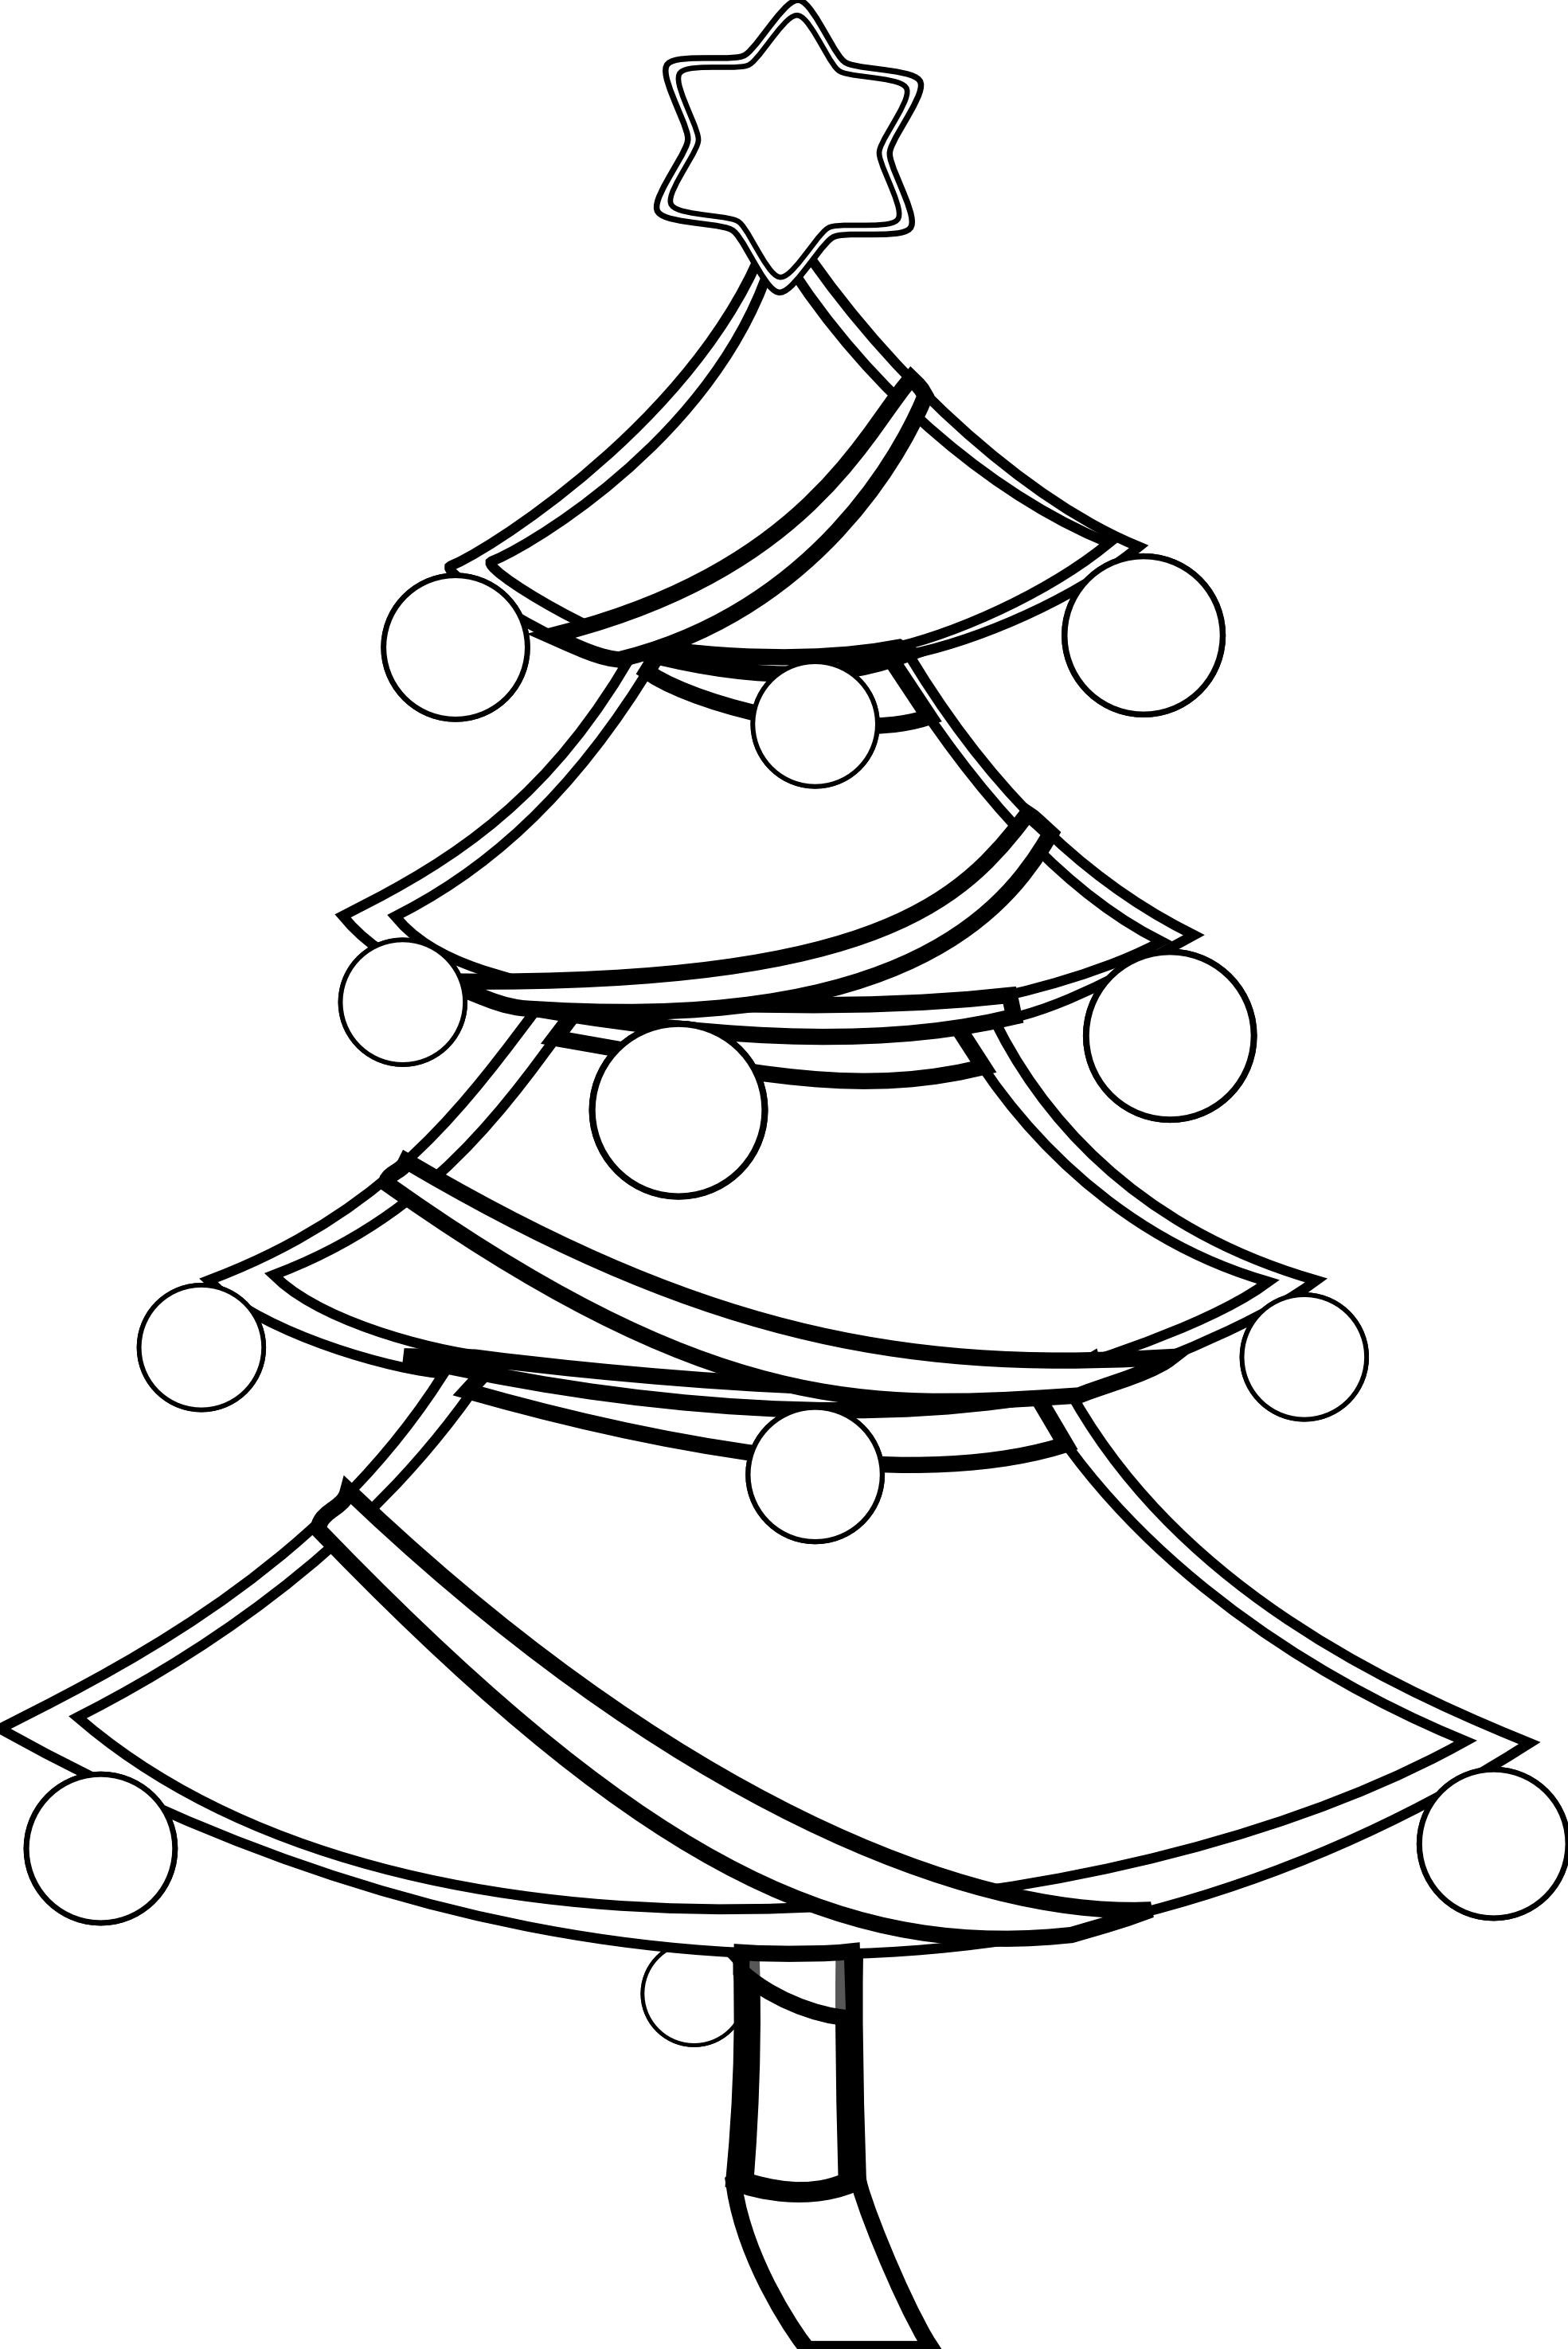 Christmas Tree Images Clip Art - ClipArt Best